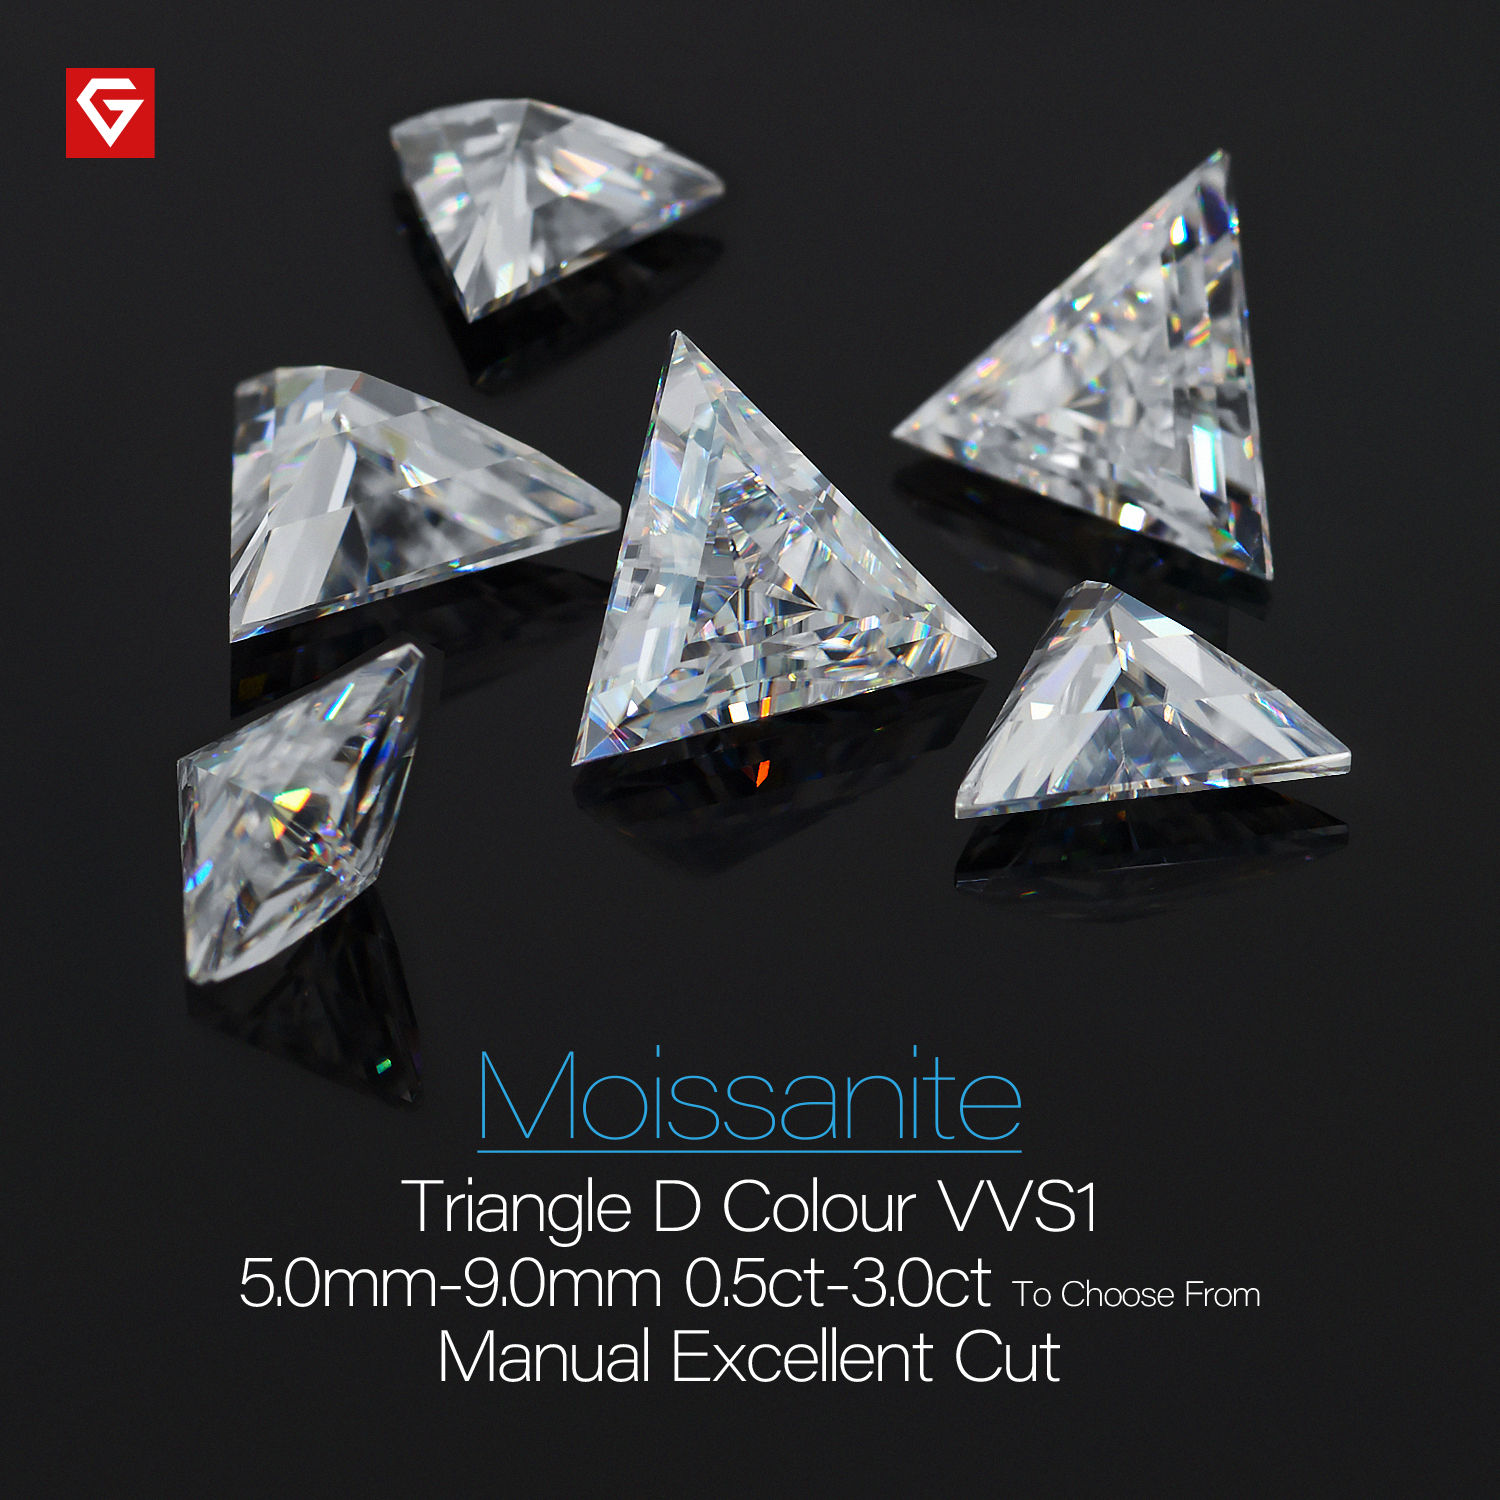 GIGAJEWE D Colour Excellent Triangle Cut Moissanite Loose Diamond Pass Tester Gems Stone For Jewelry making